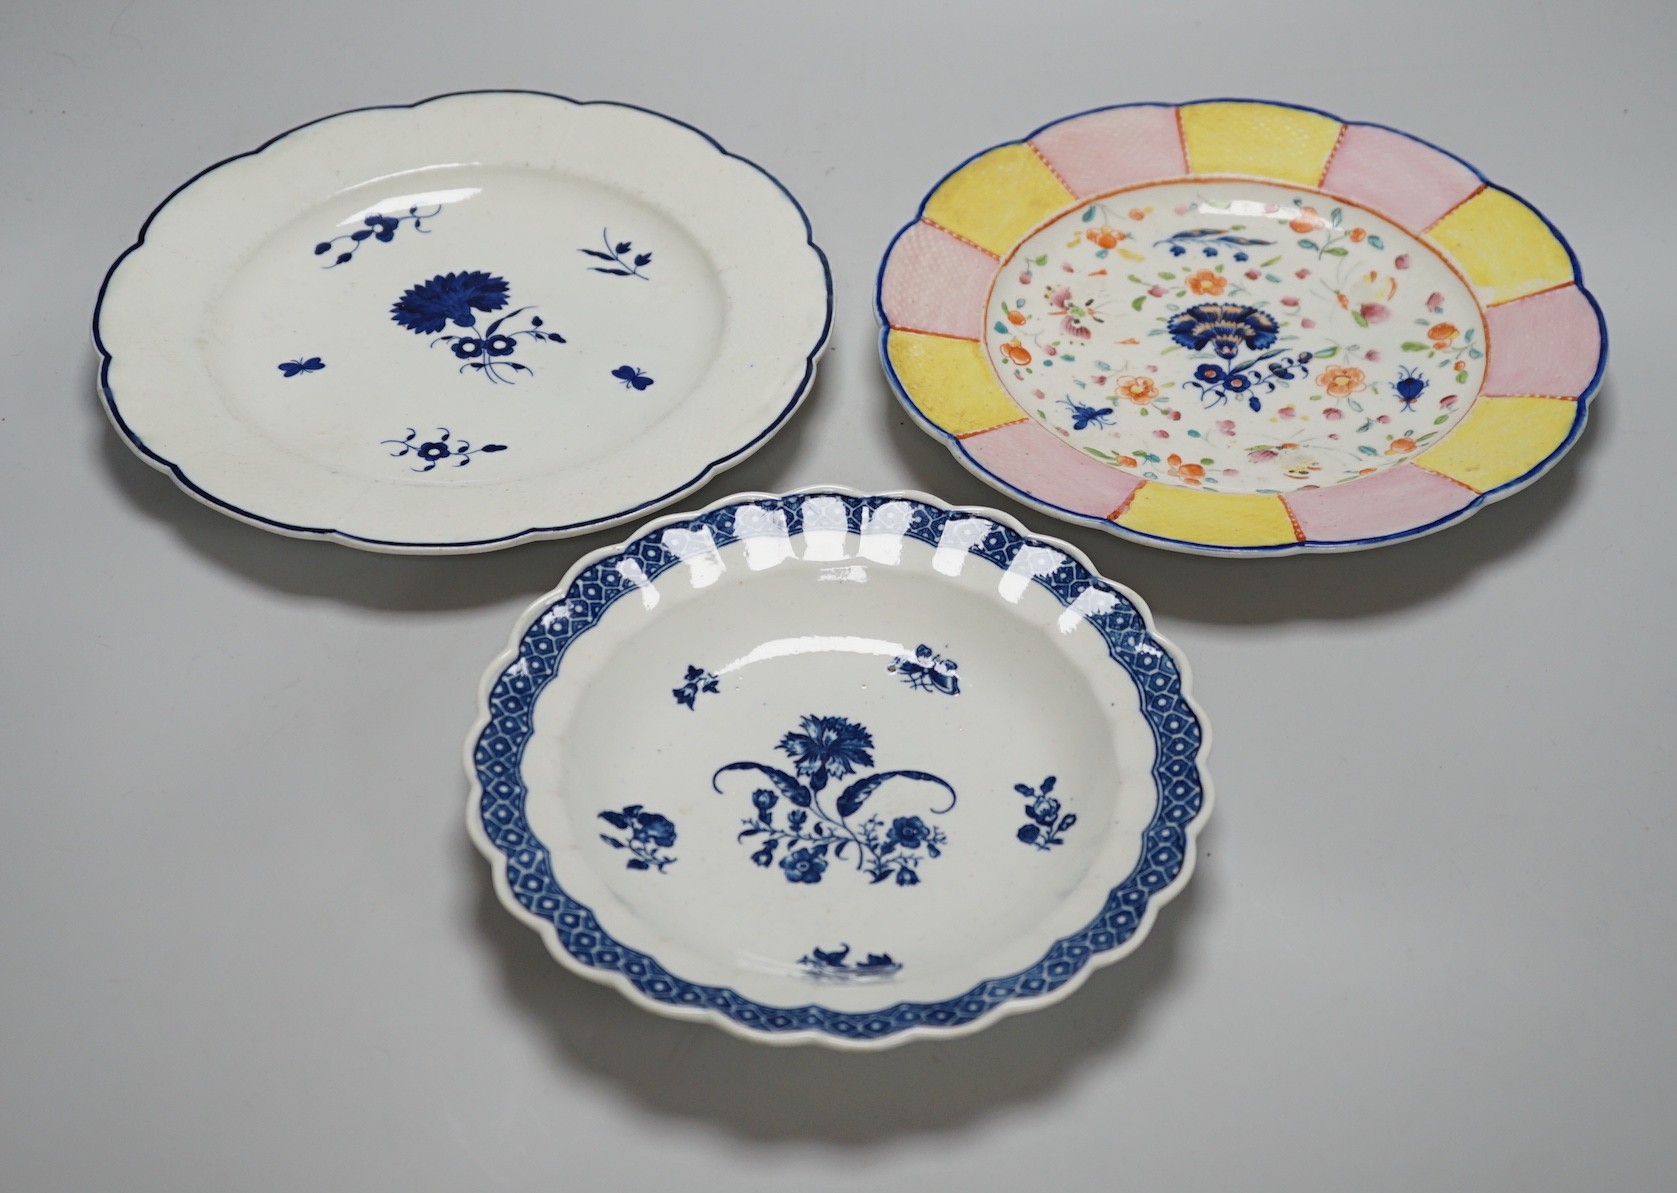 An 18th century Caughley plate printed with Gillyflower variation 5, 20.5cms diameter and two plates with the Carnation pattern, one with added polychrome decoration